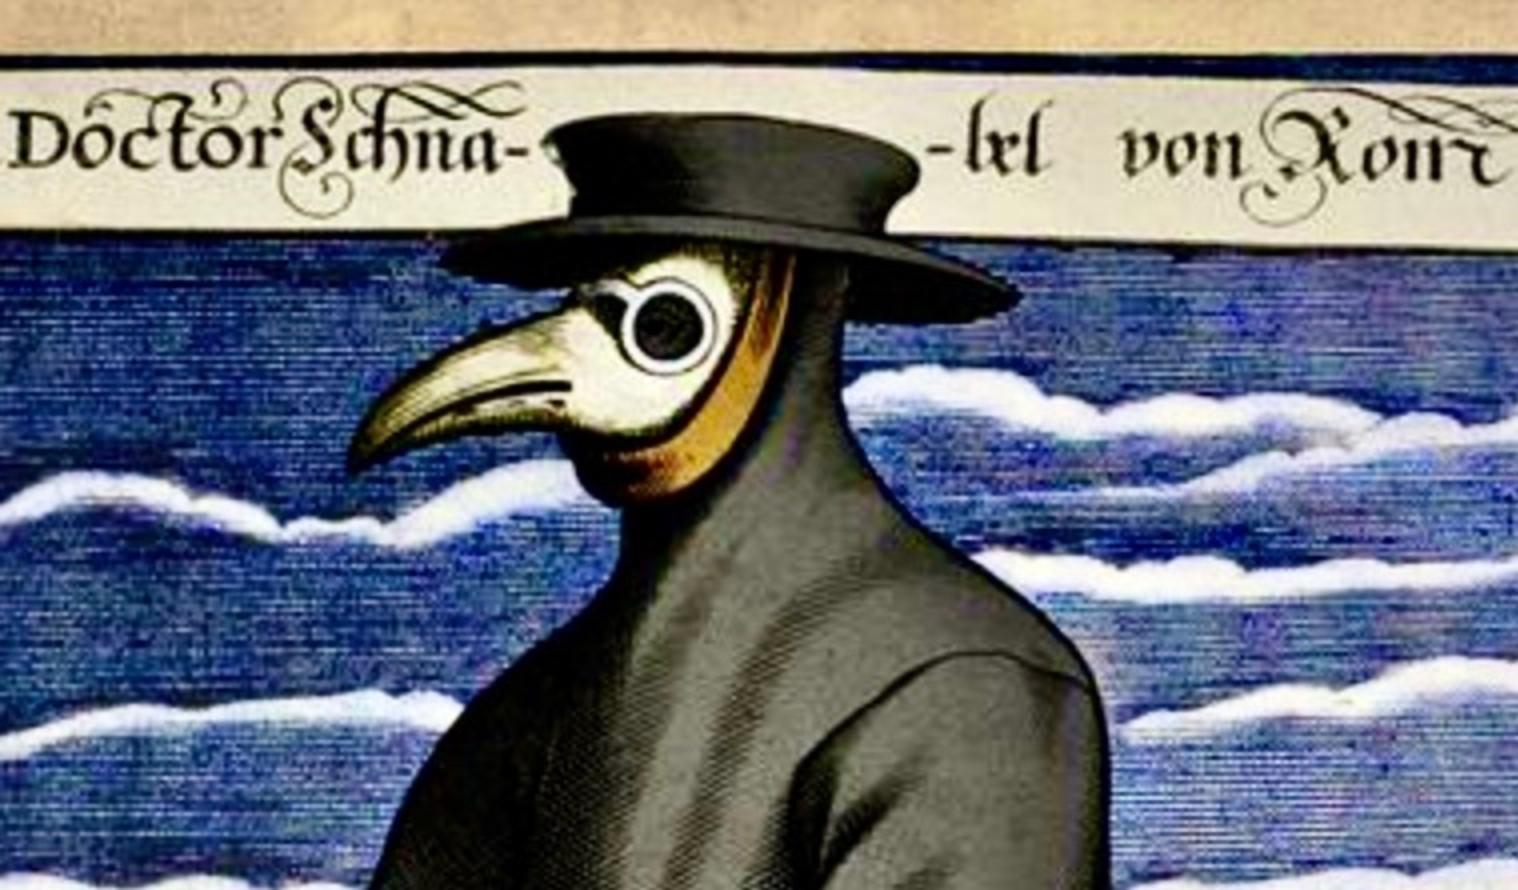 This is not a macabre depiction of the Grim Reaper but rather "Dr. Beaky of Rome" featured in a colored engraving by Paul Furst created around 1721. It portrays a "plague doctor" in France. During the Black Plague, physicians of the time wore a special outfit with a brimmed hat, long coat and raven-like bird's beak mask with the belief it would protect them from airborne illnesses. The importance of masks continues in our own time. 